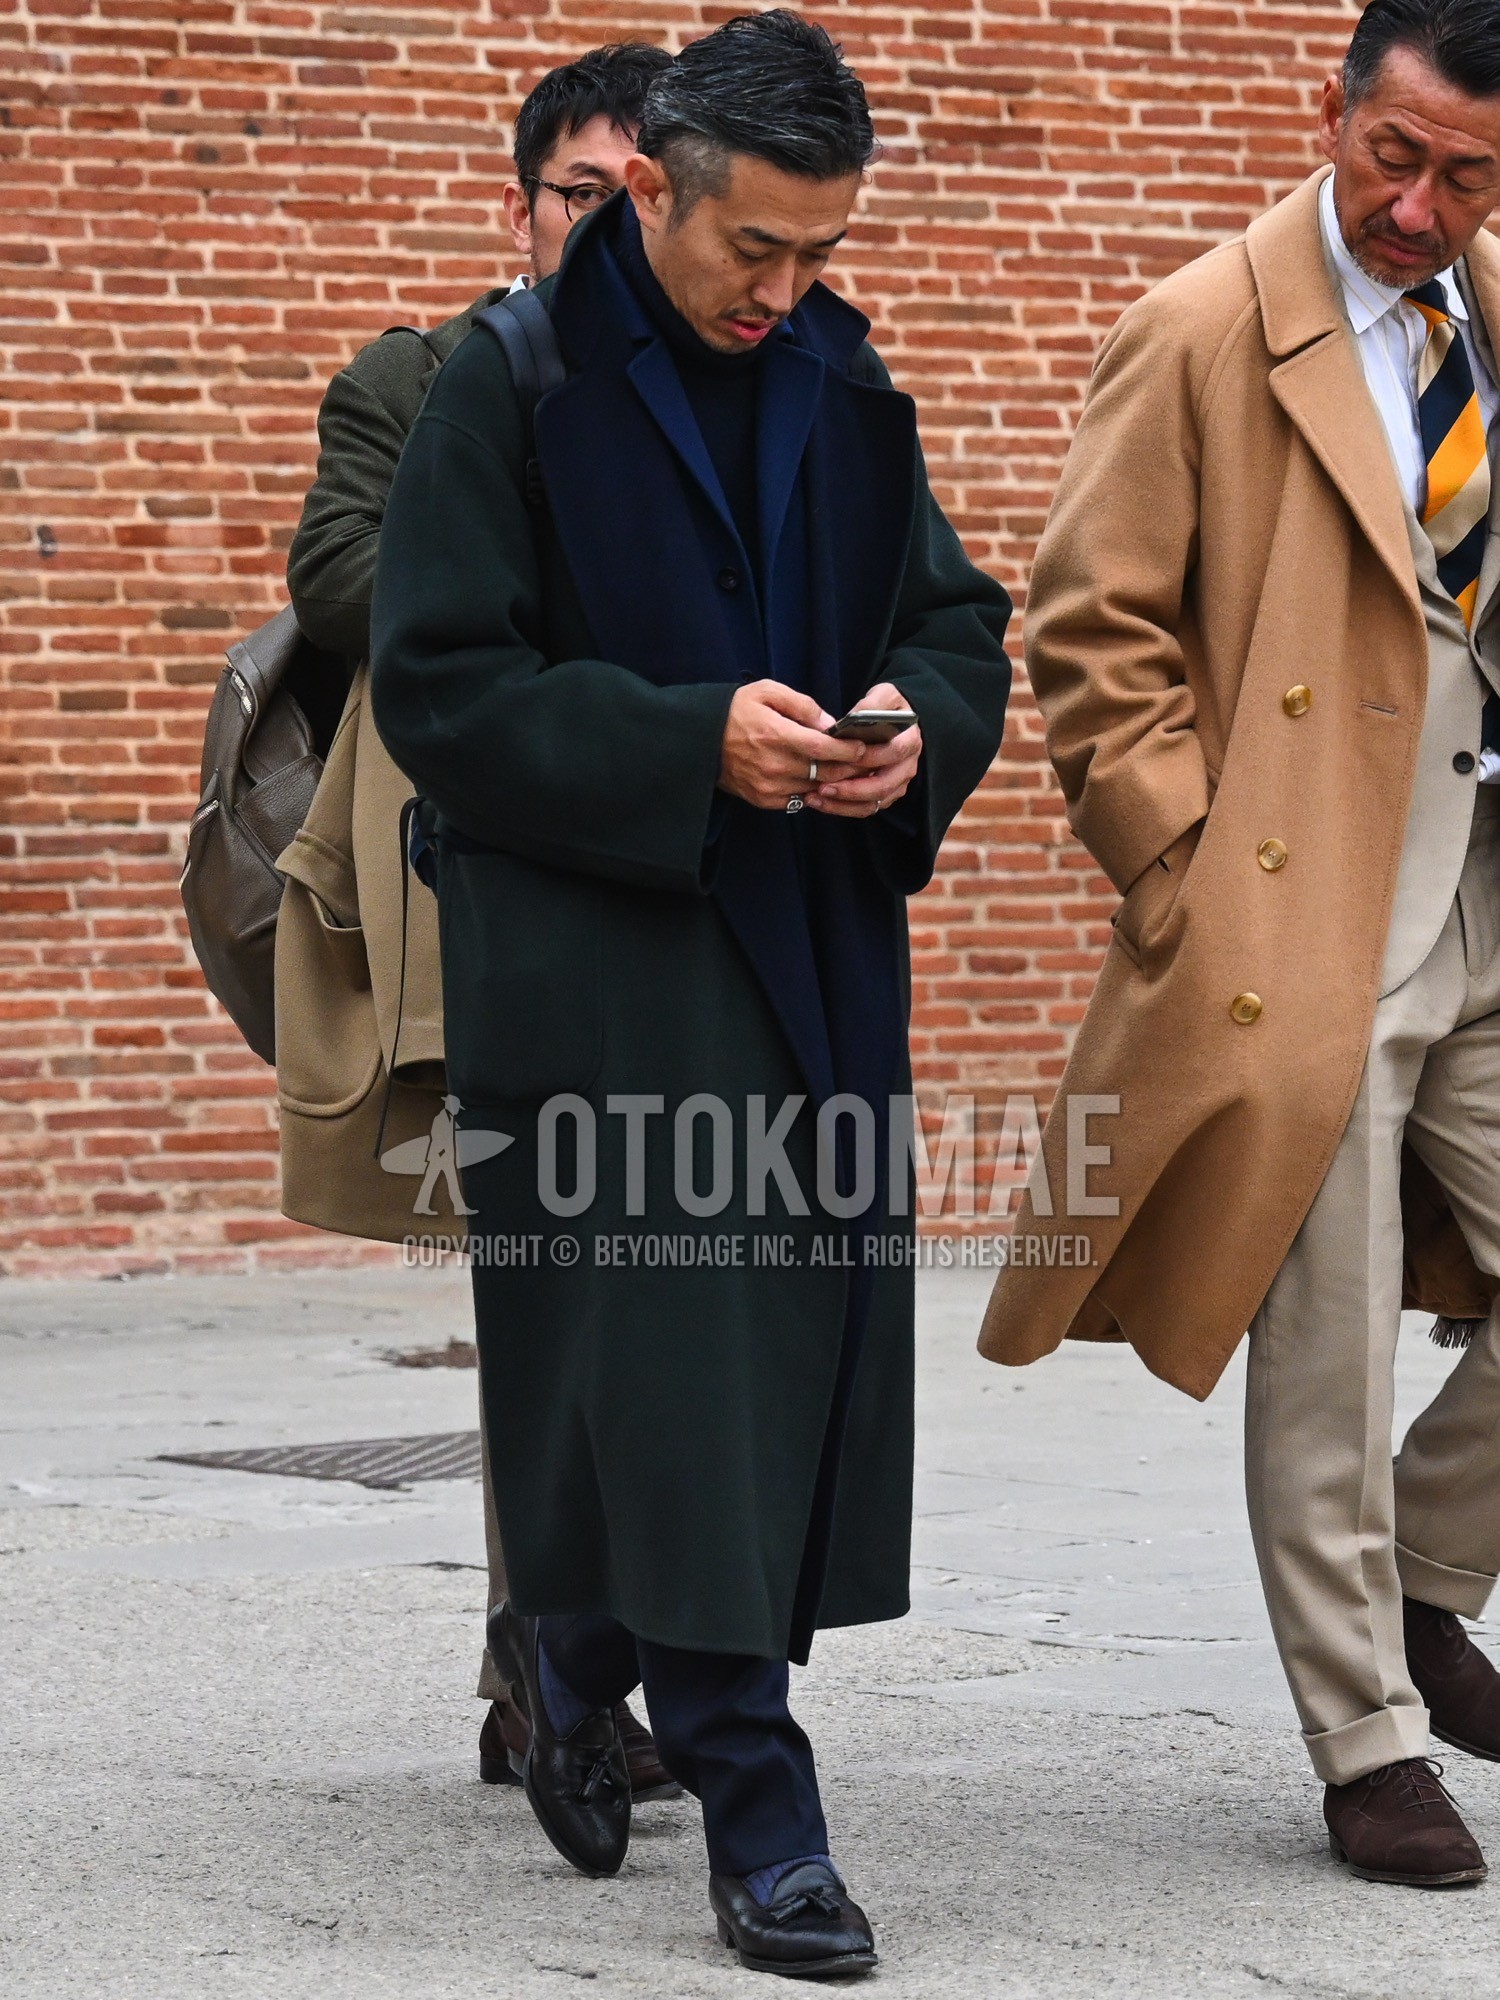 Men's autumn winter outfit with green plain ulster coat, navy plain tailored jacket, black plain turtleneck knit, navy plain slacks, navy plain socks, black tassel loafers leather shoes, black plain backpack.